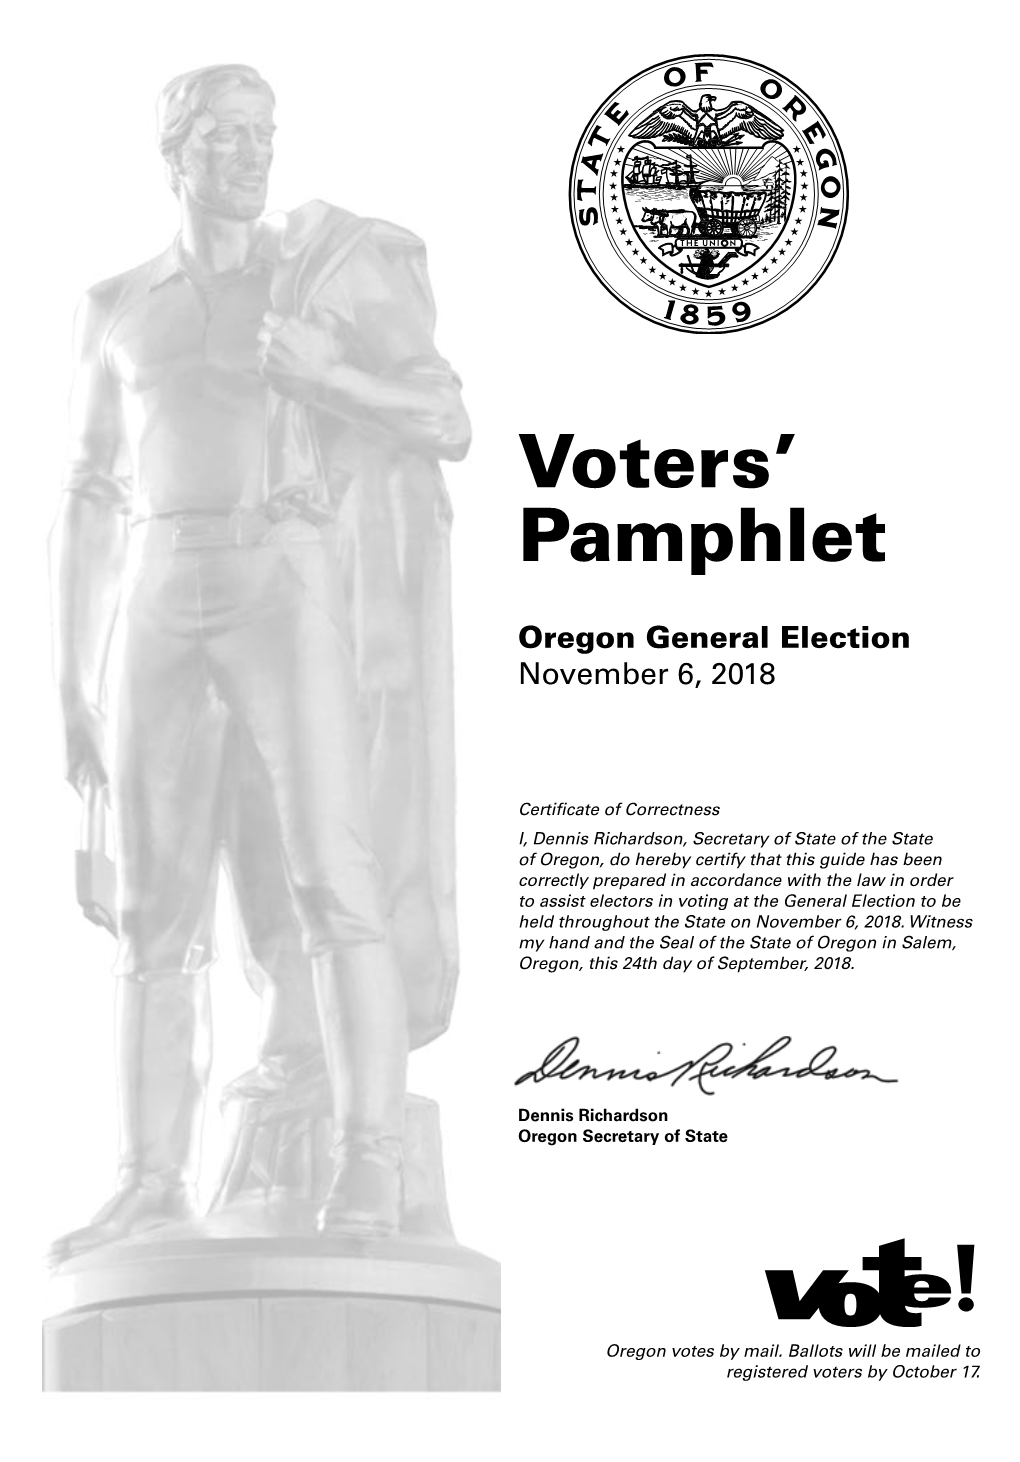 Voters' Pamphlet General Election 2018 for Josephine County